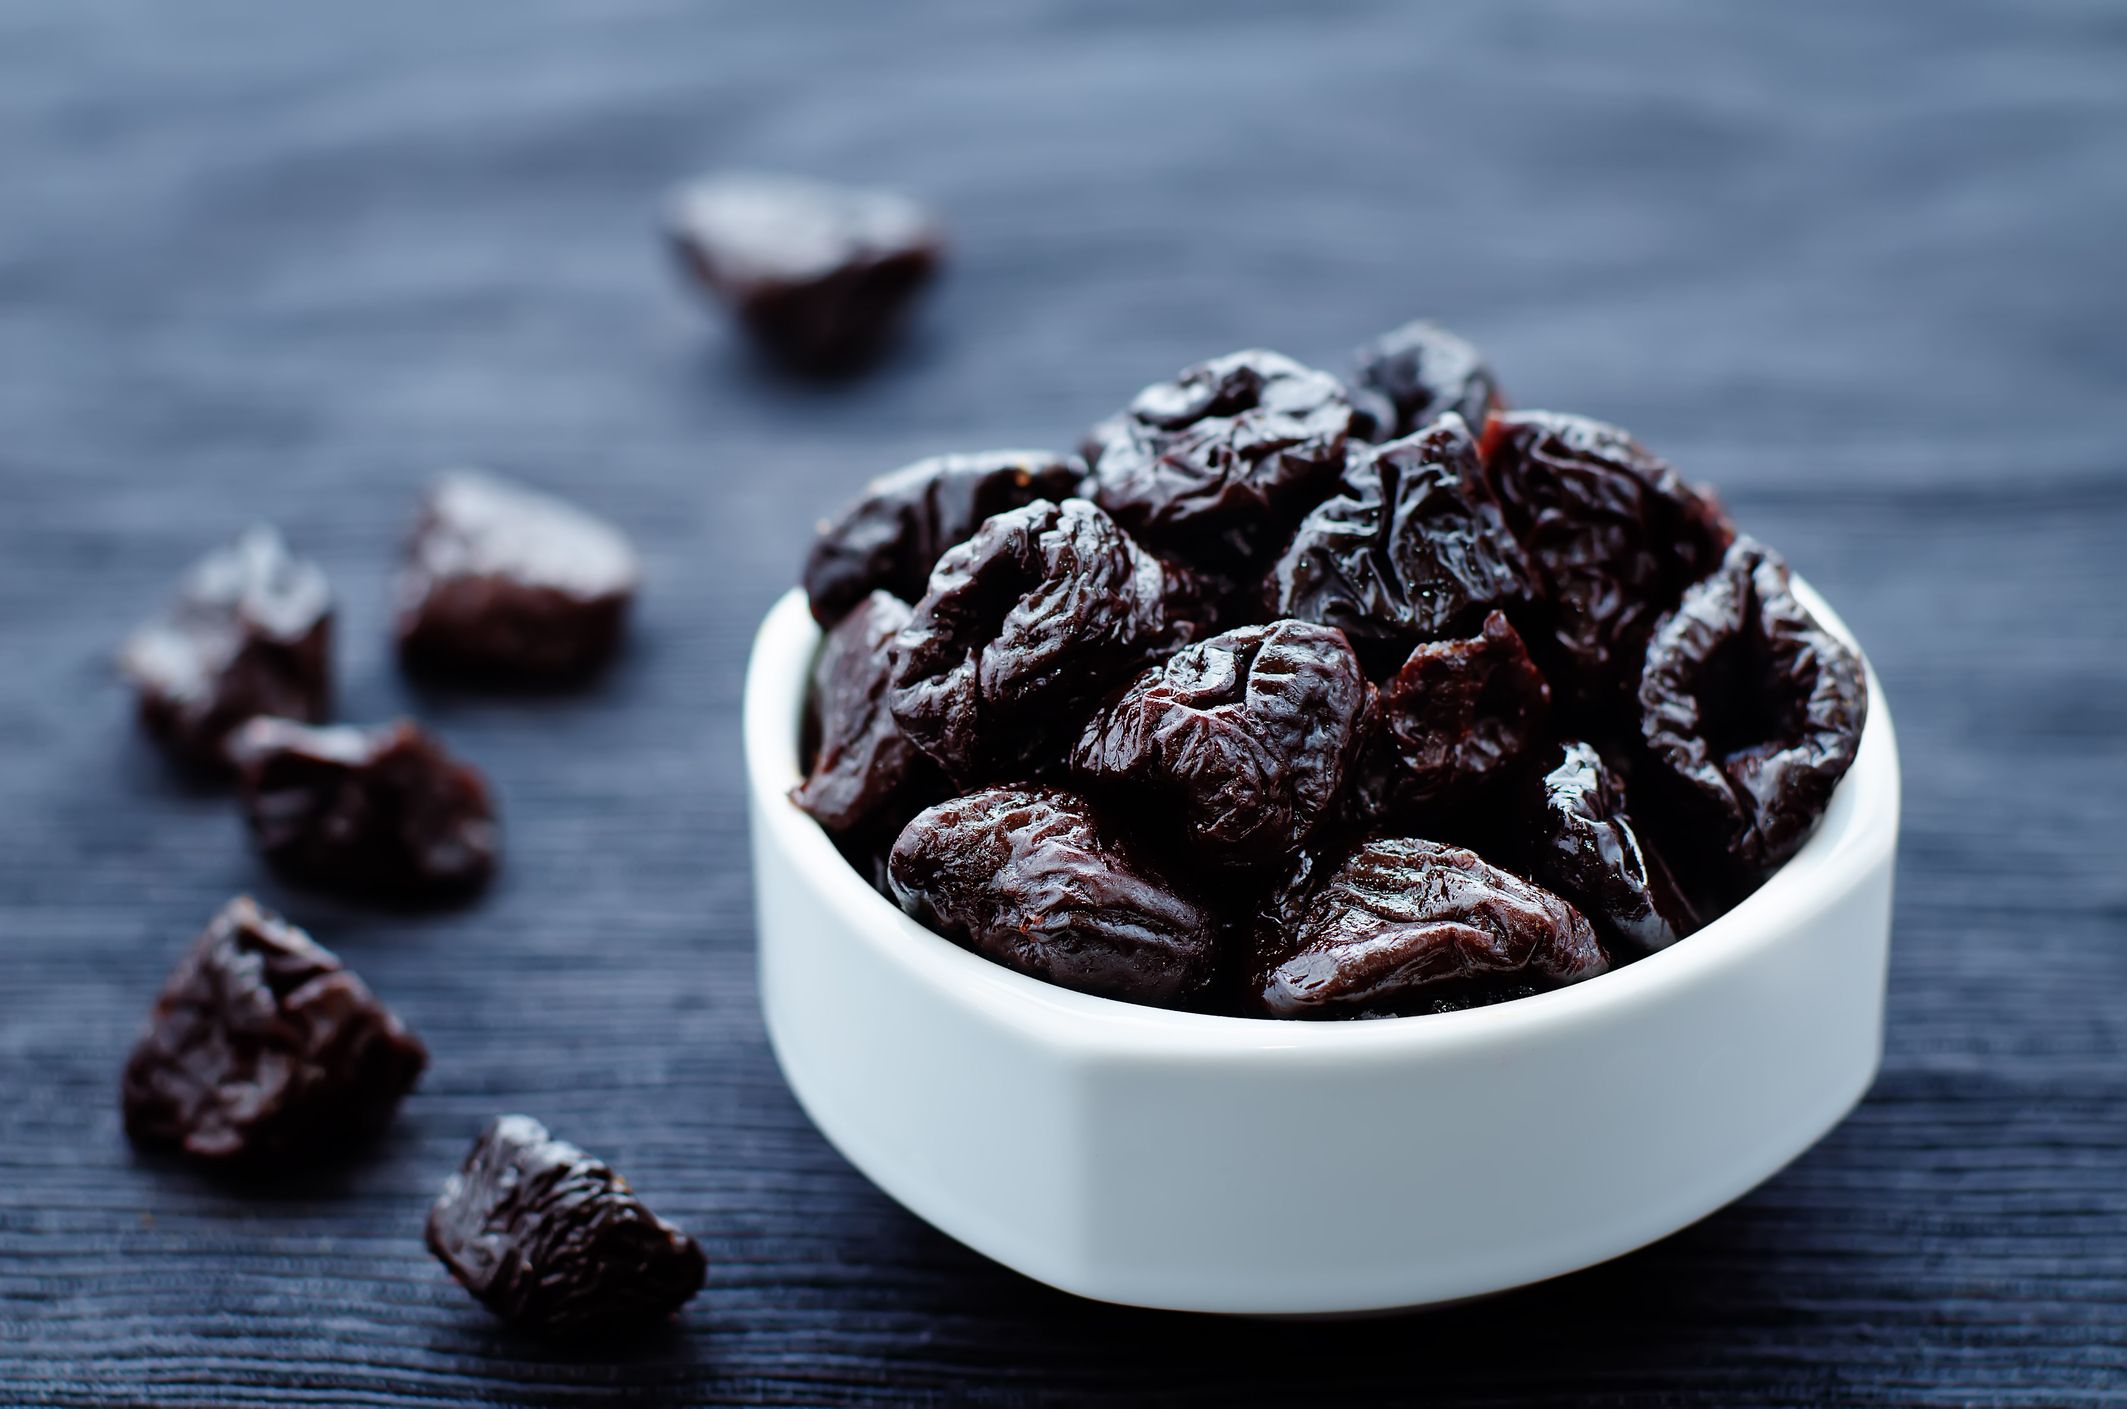 Prunes may have another health benefit: reducing the risk of osteoporosis